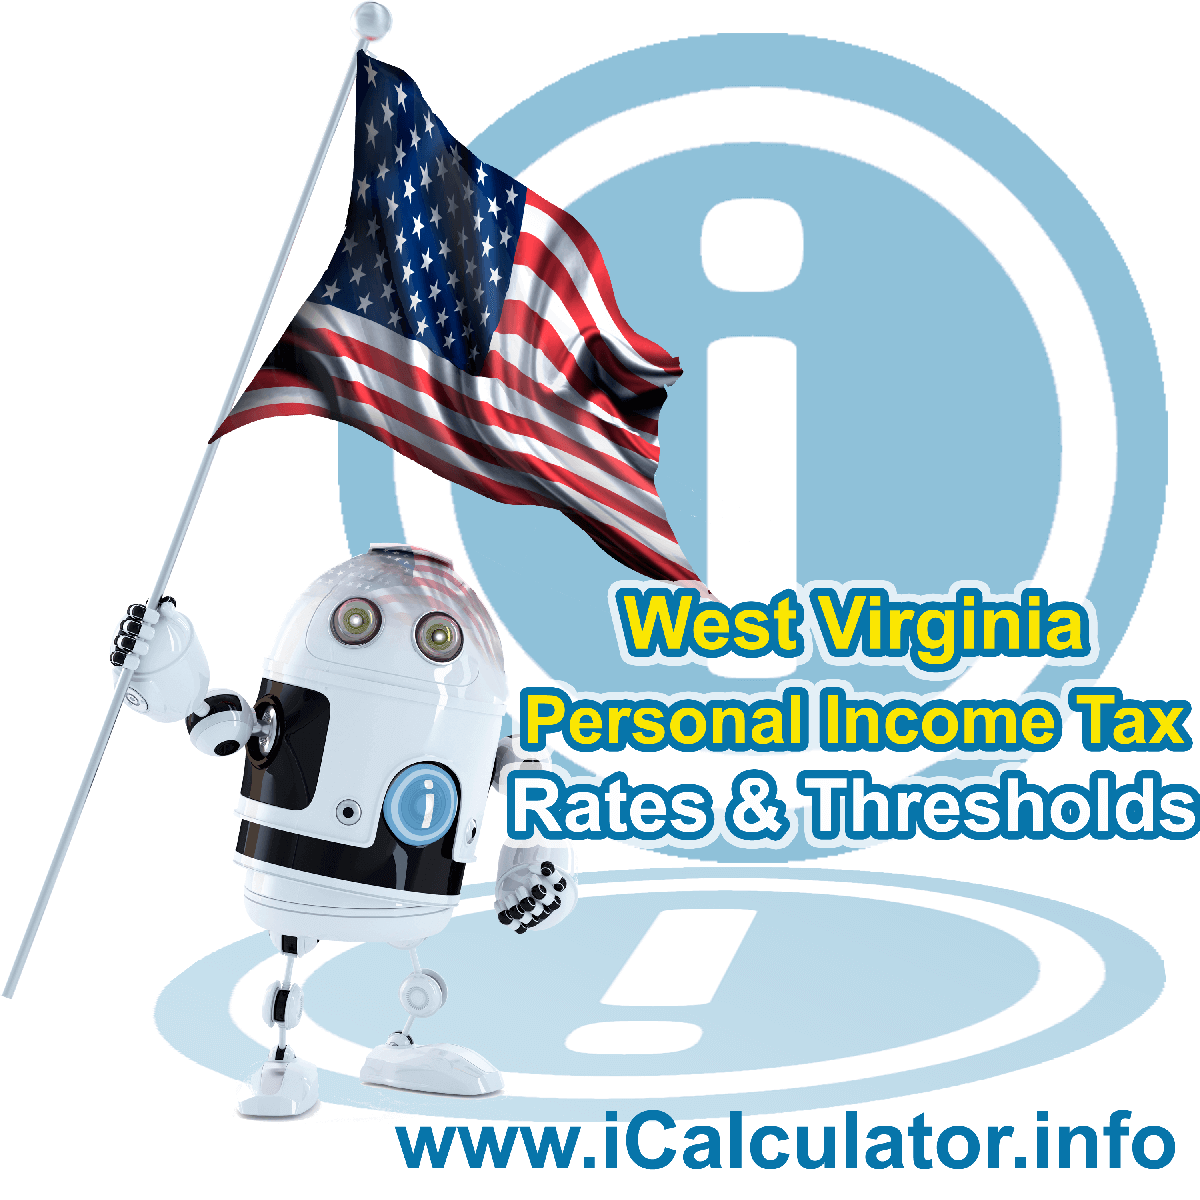 West Virginia State Tax Tables 2018. This image displays details of the West Virginia State Tax Tables for the 2018 tax return year which is provided in support of the 2018 US Tax Calculator